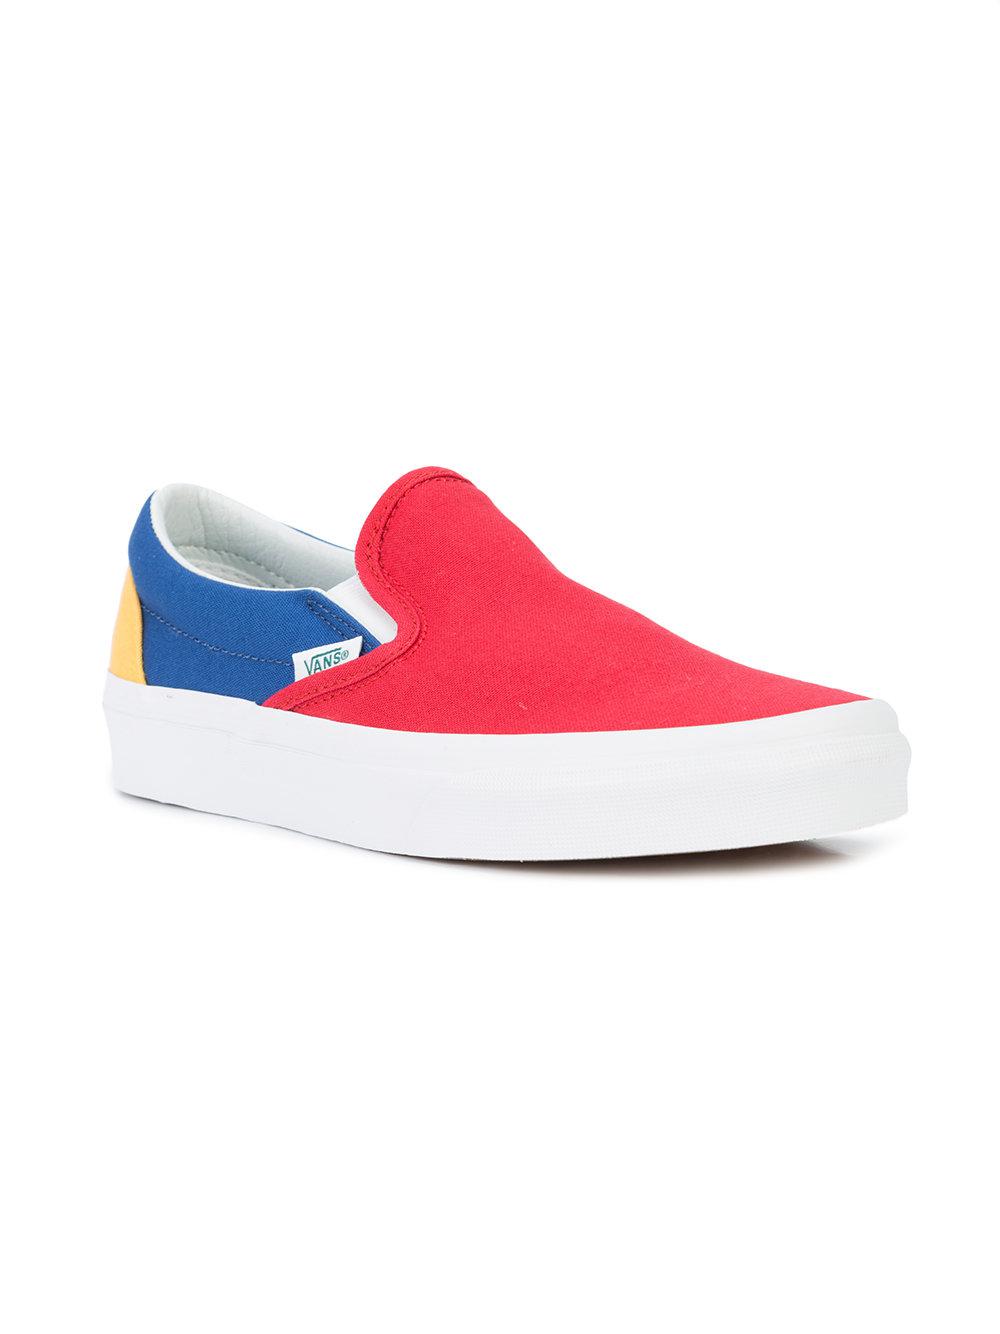 Vans Yacht Club Classic Slip-on Skate Shoes in Red for Men - Lyst